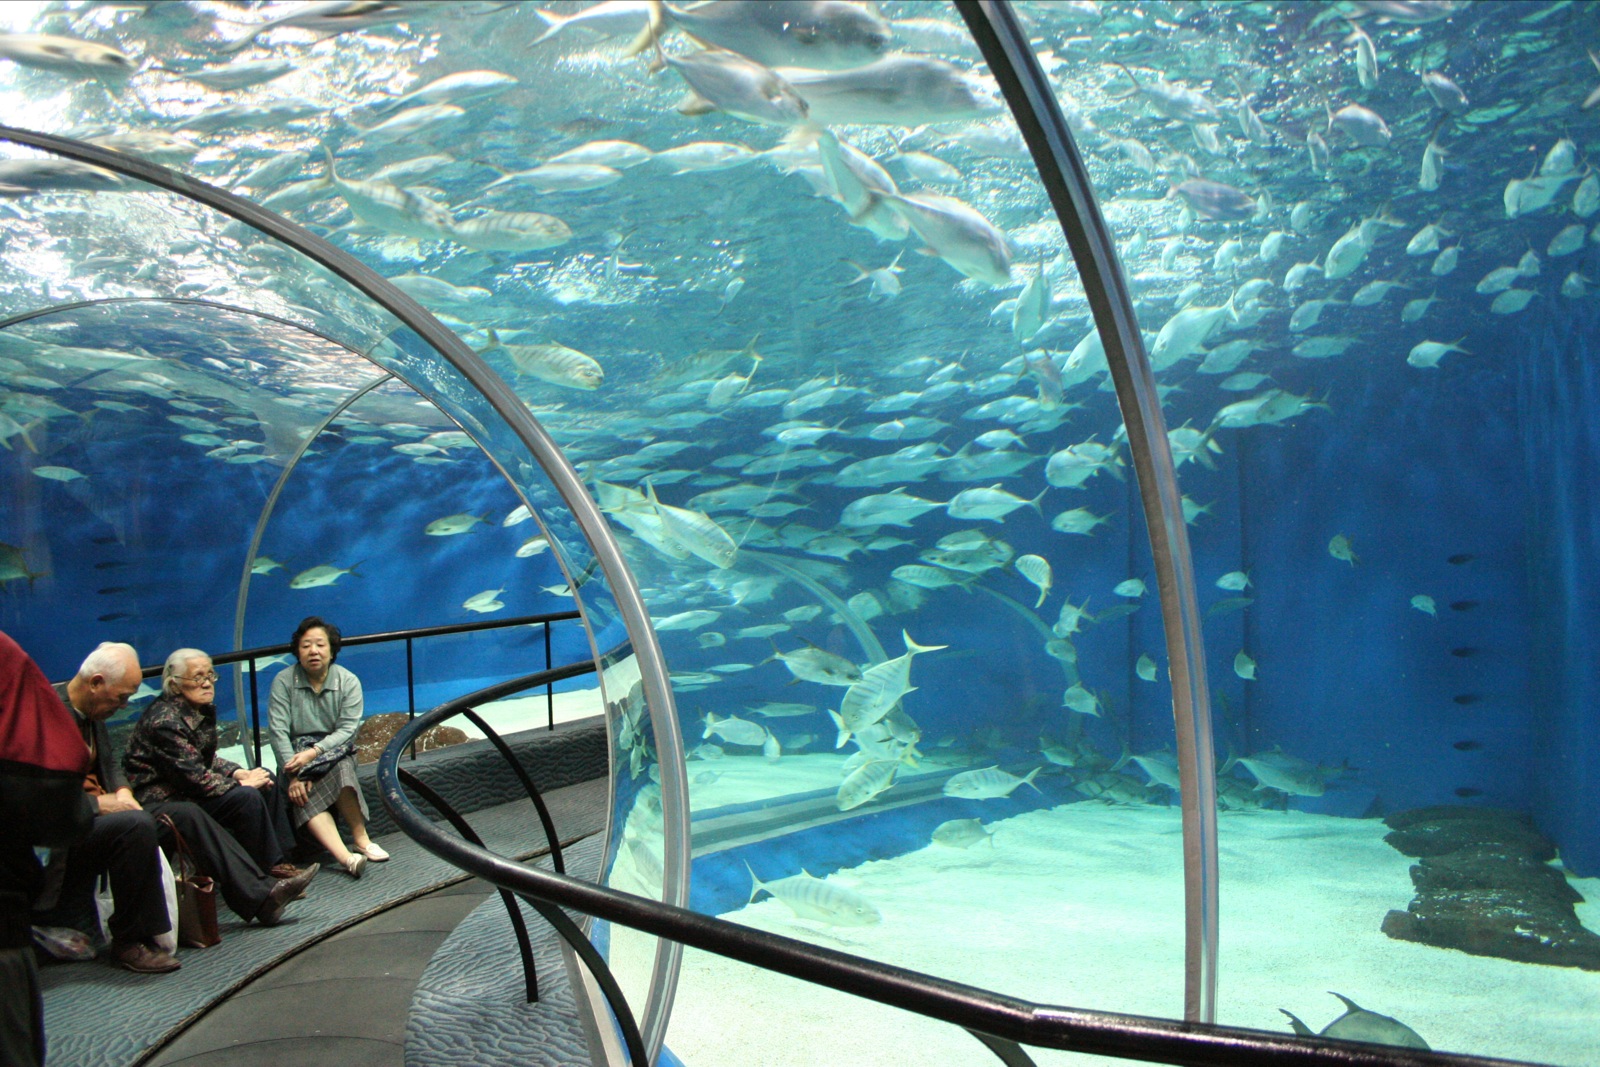 several people are sitting on a metal ledge in an aquarium